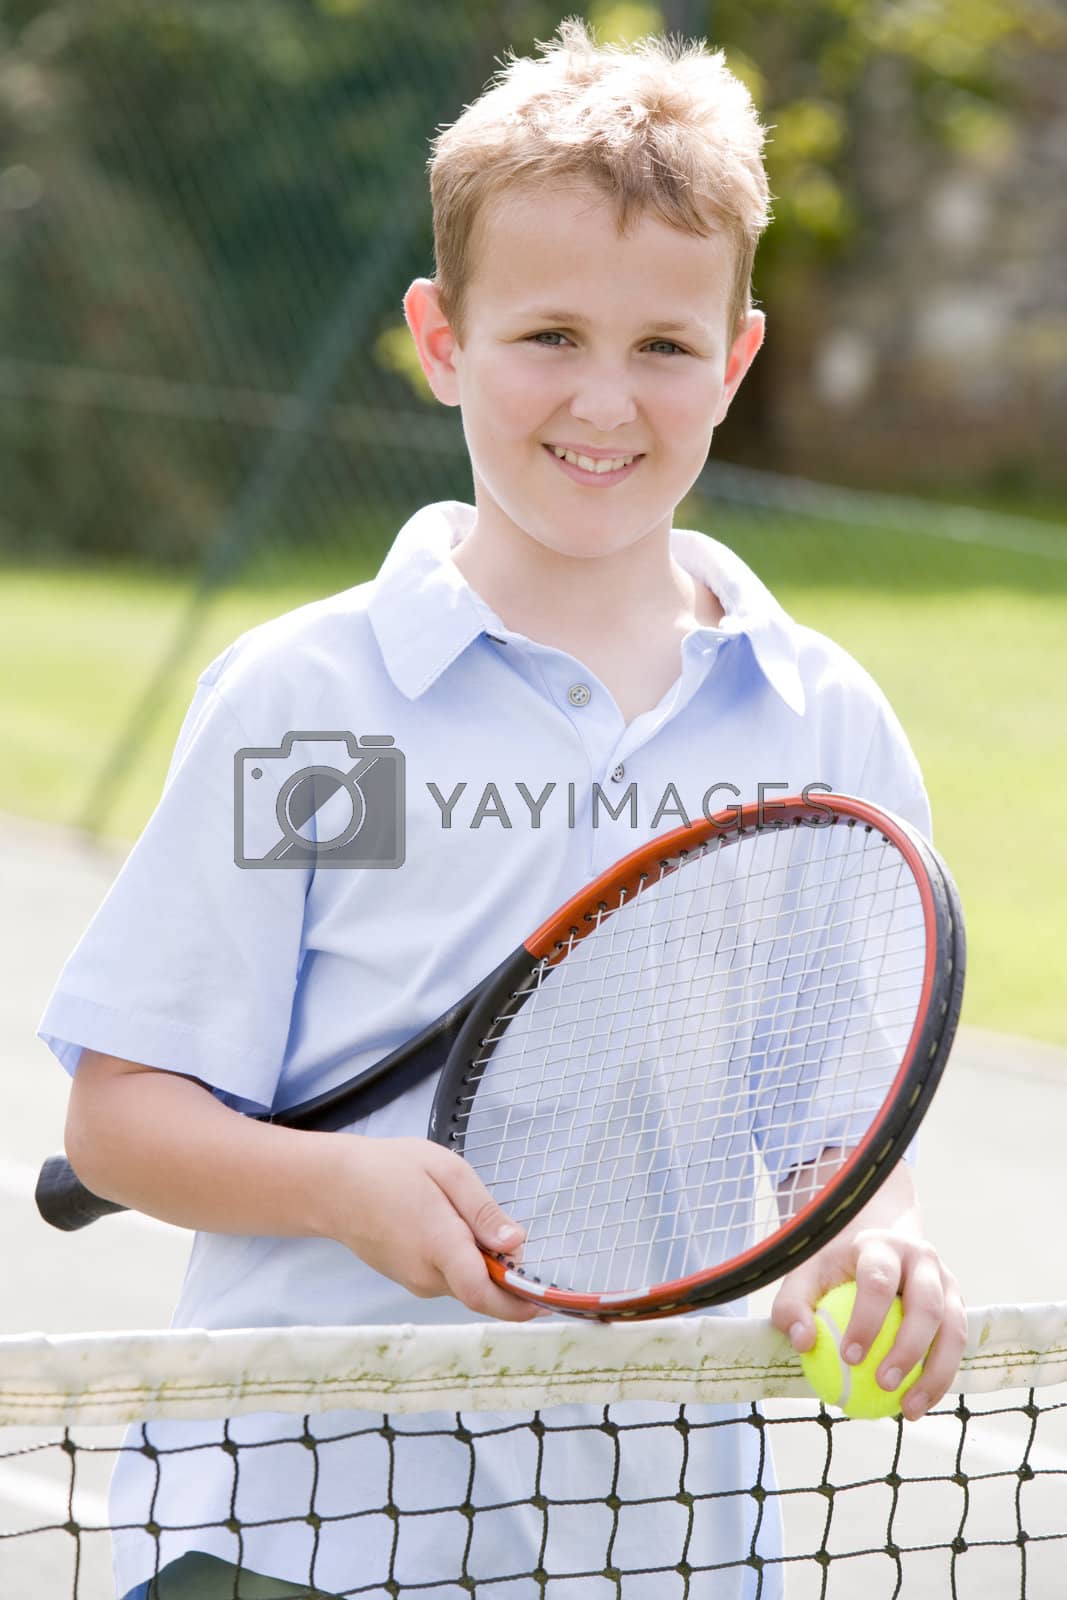 Royalty free image of Young boy with racket on tennis court smiling by MonkeyBusiness